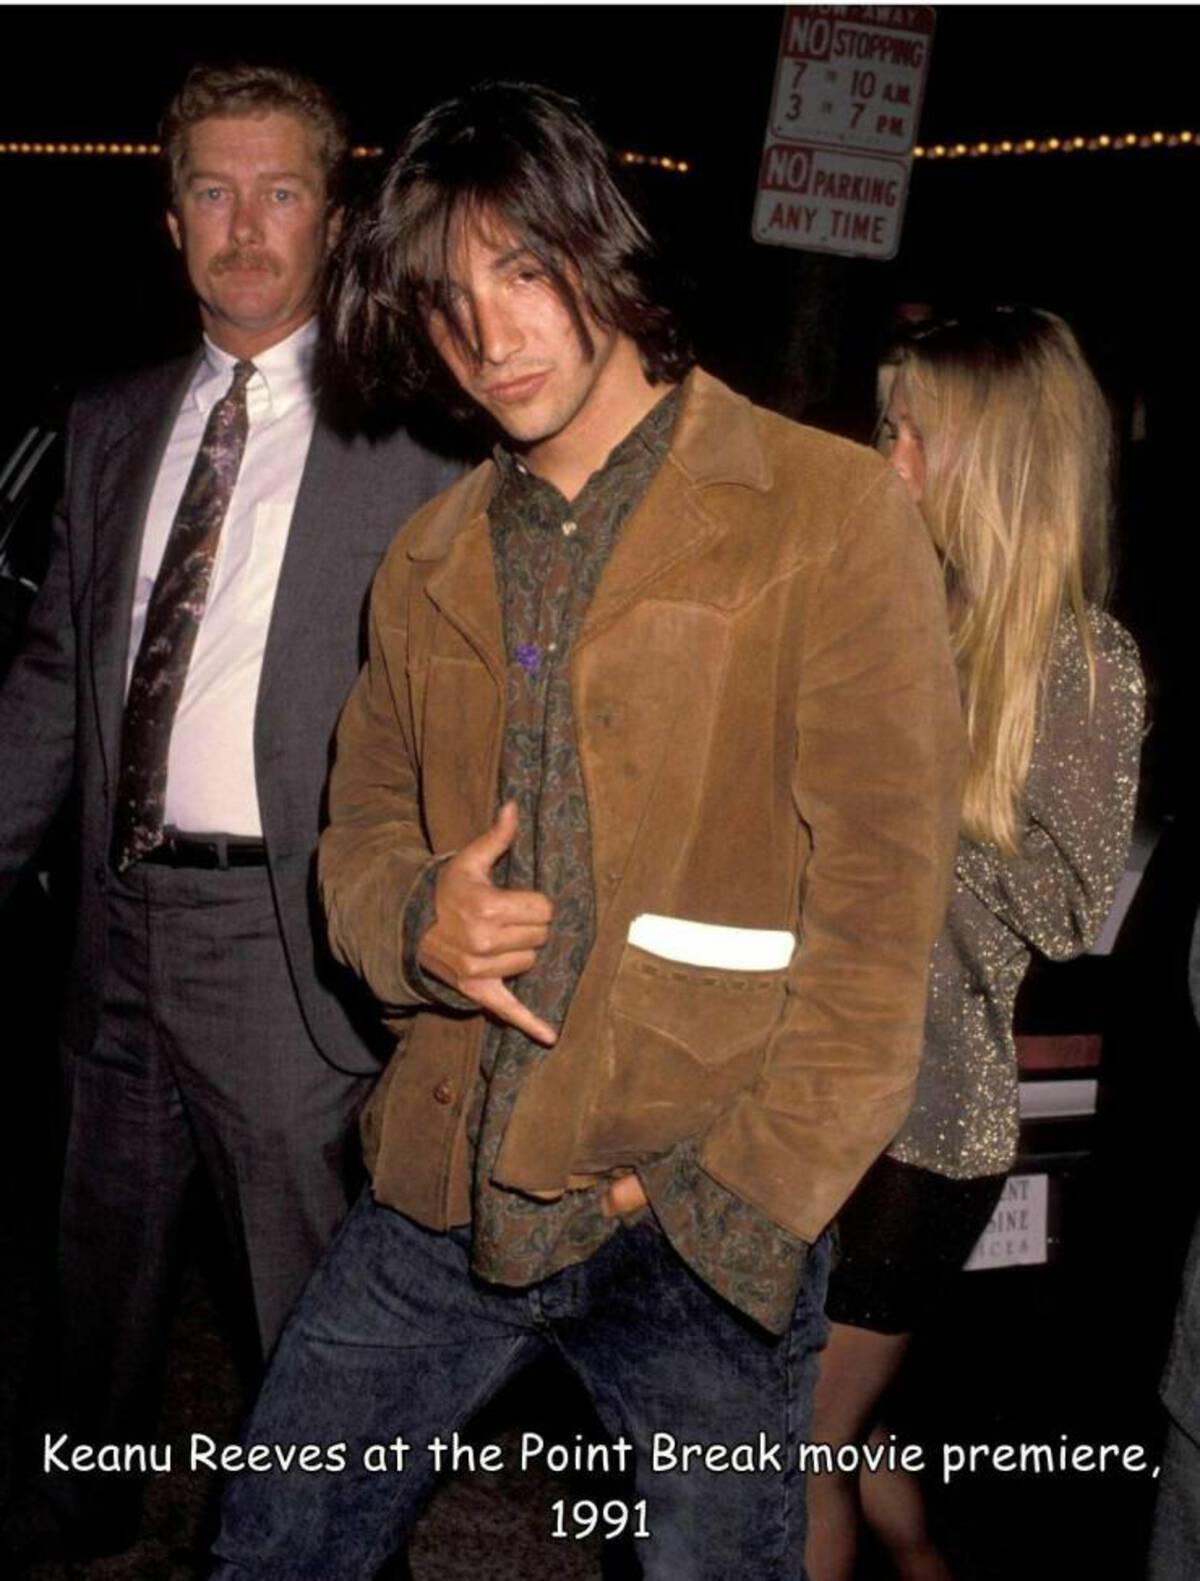 keanu reeves point break premiere - Away No Stopping 7 10 Am 3T 7 Pm No Parking Any Time Nt Ine ots Keanu Reeves at the Point Break movie premiere, 1991